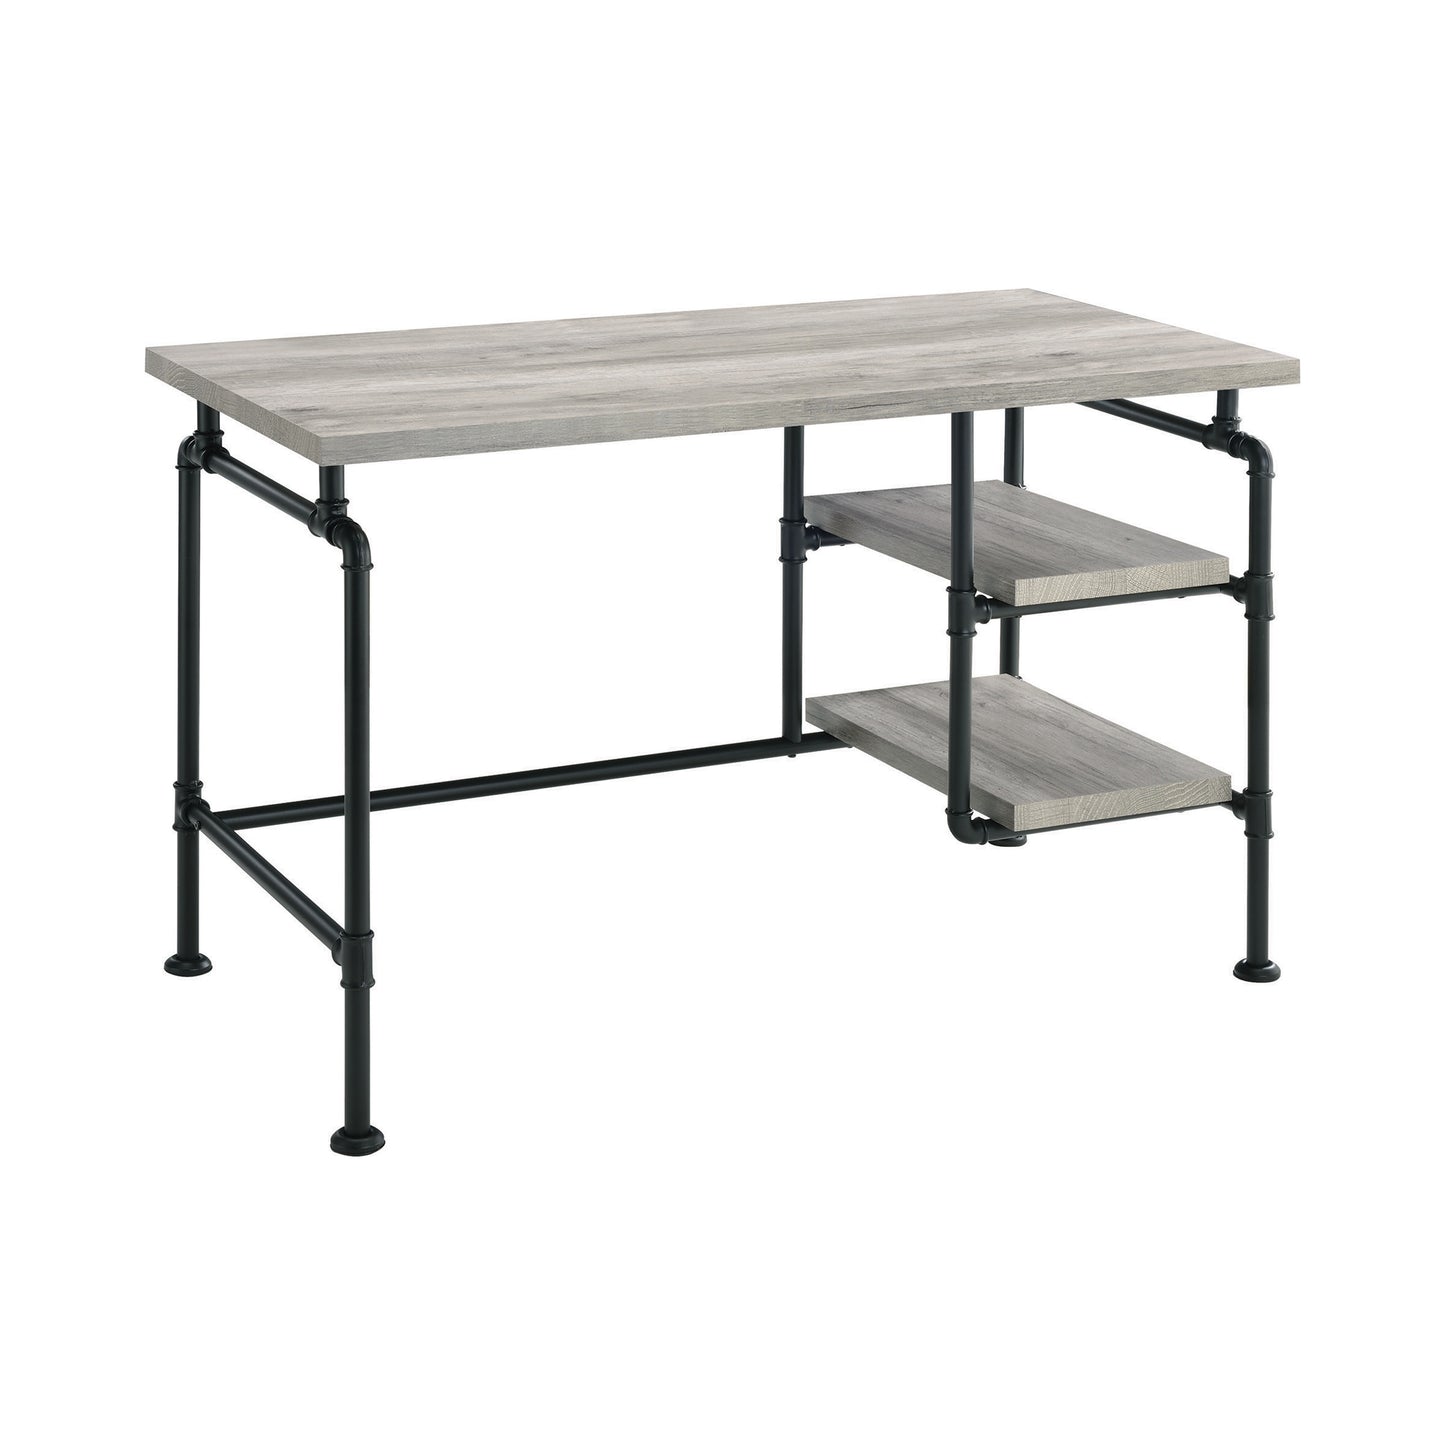 Delray 2-Tier Open Shelving Writing Desk Grey Driftwood And Black - 803701